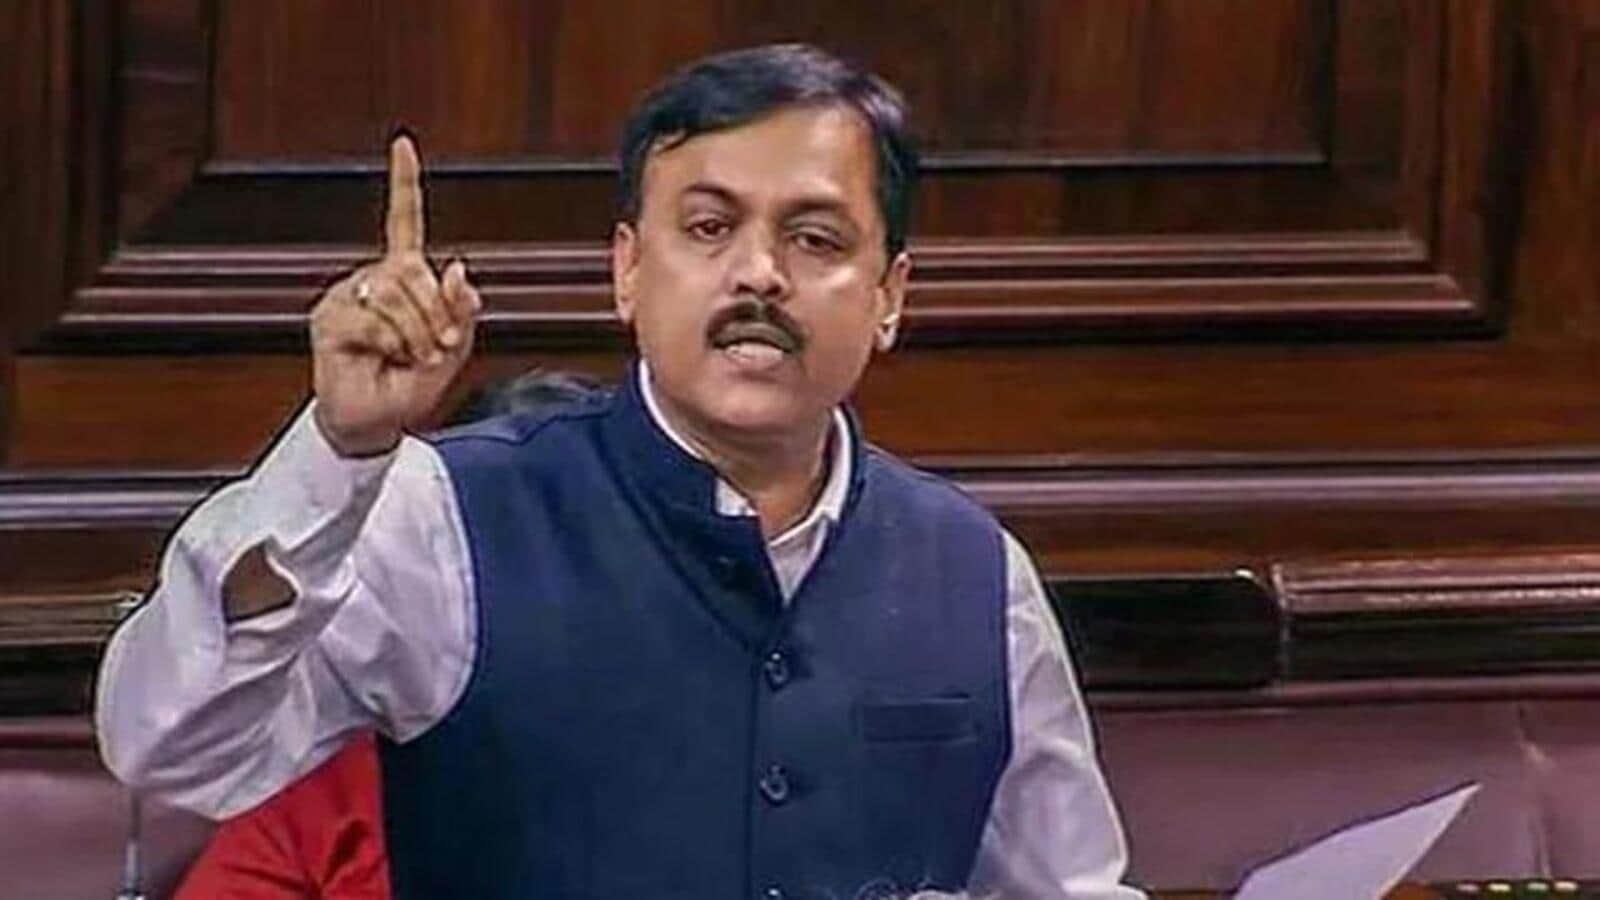 BJP's GVL Narasimha Rao appeals for alumni body for retd MPs, gains support  | Latest News India - Hindustan Times